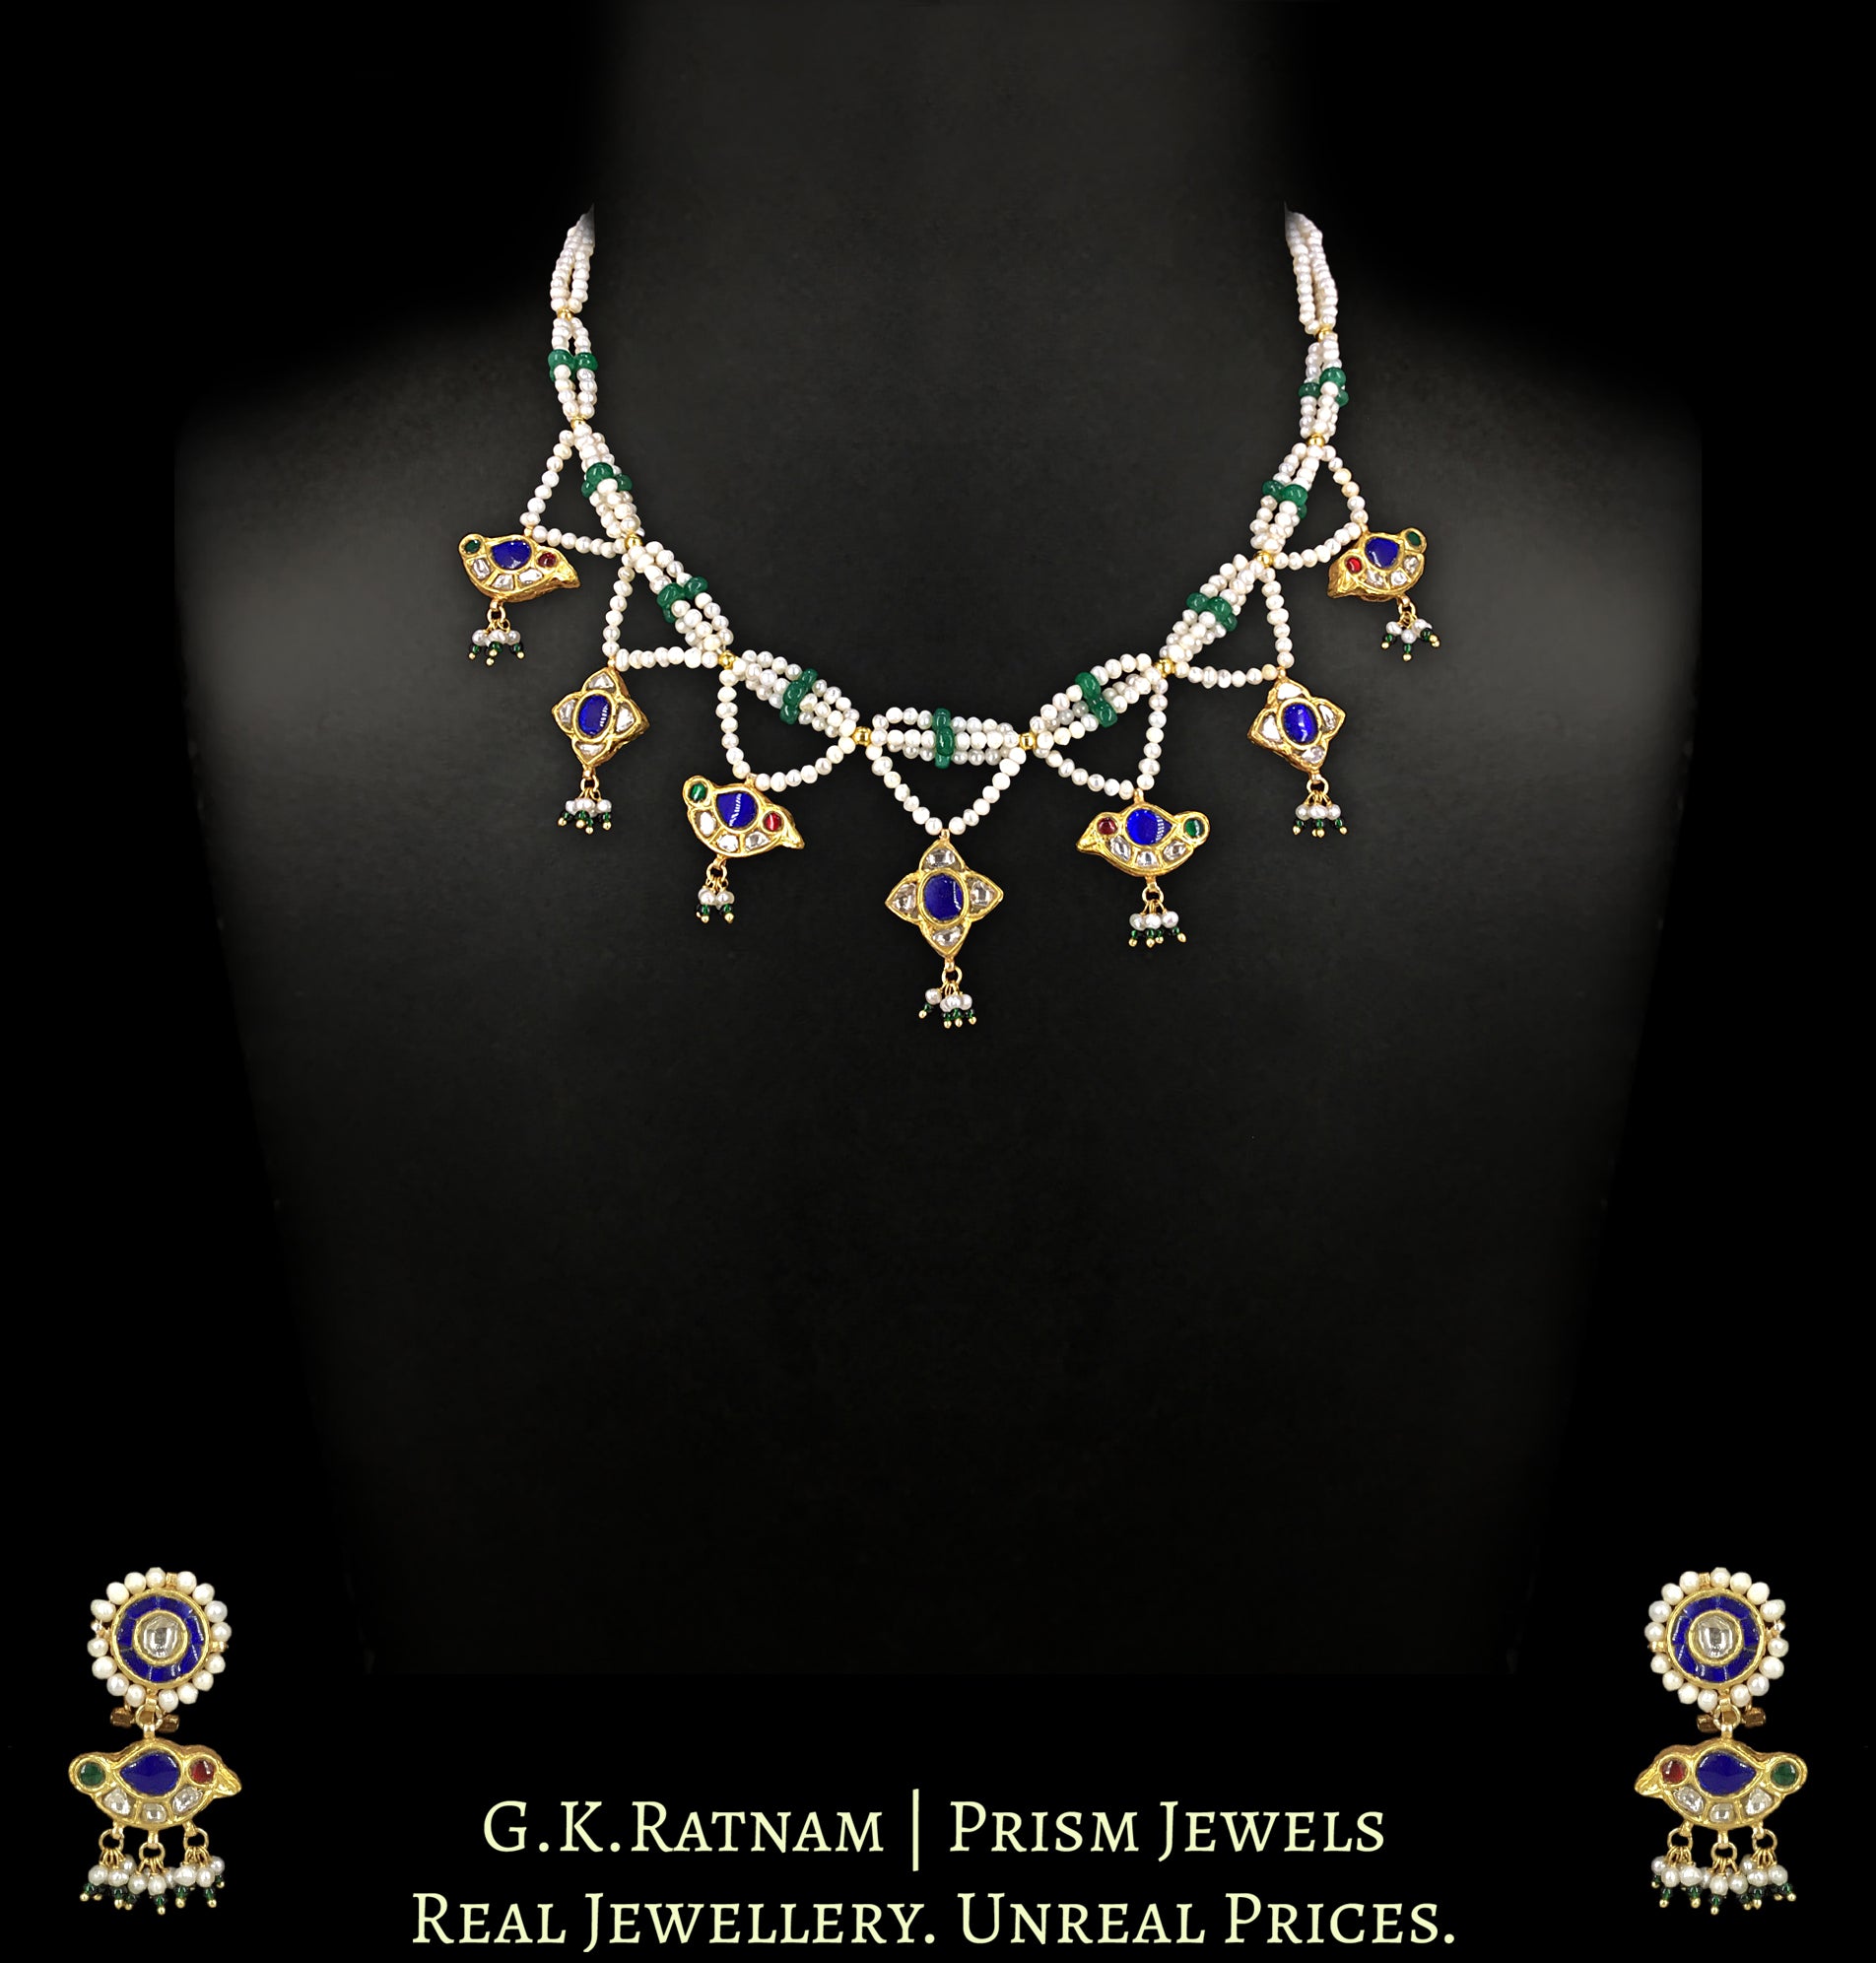 23K Gold and Diamond Polki Necklace Set with bird motifs strung in Natural Freshwater Pearls & Beryls